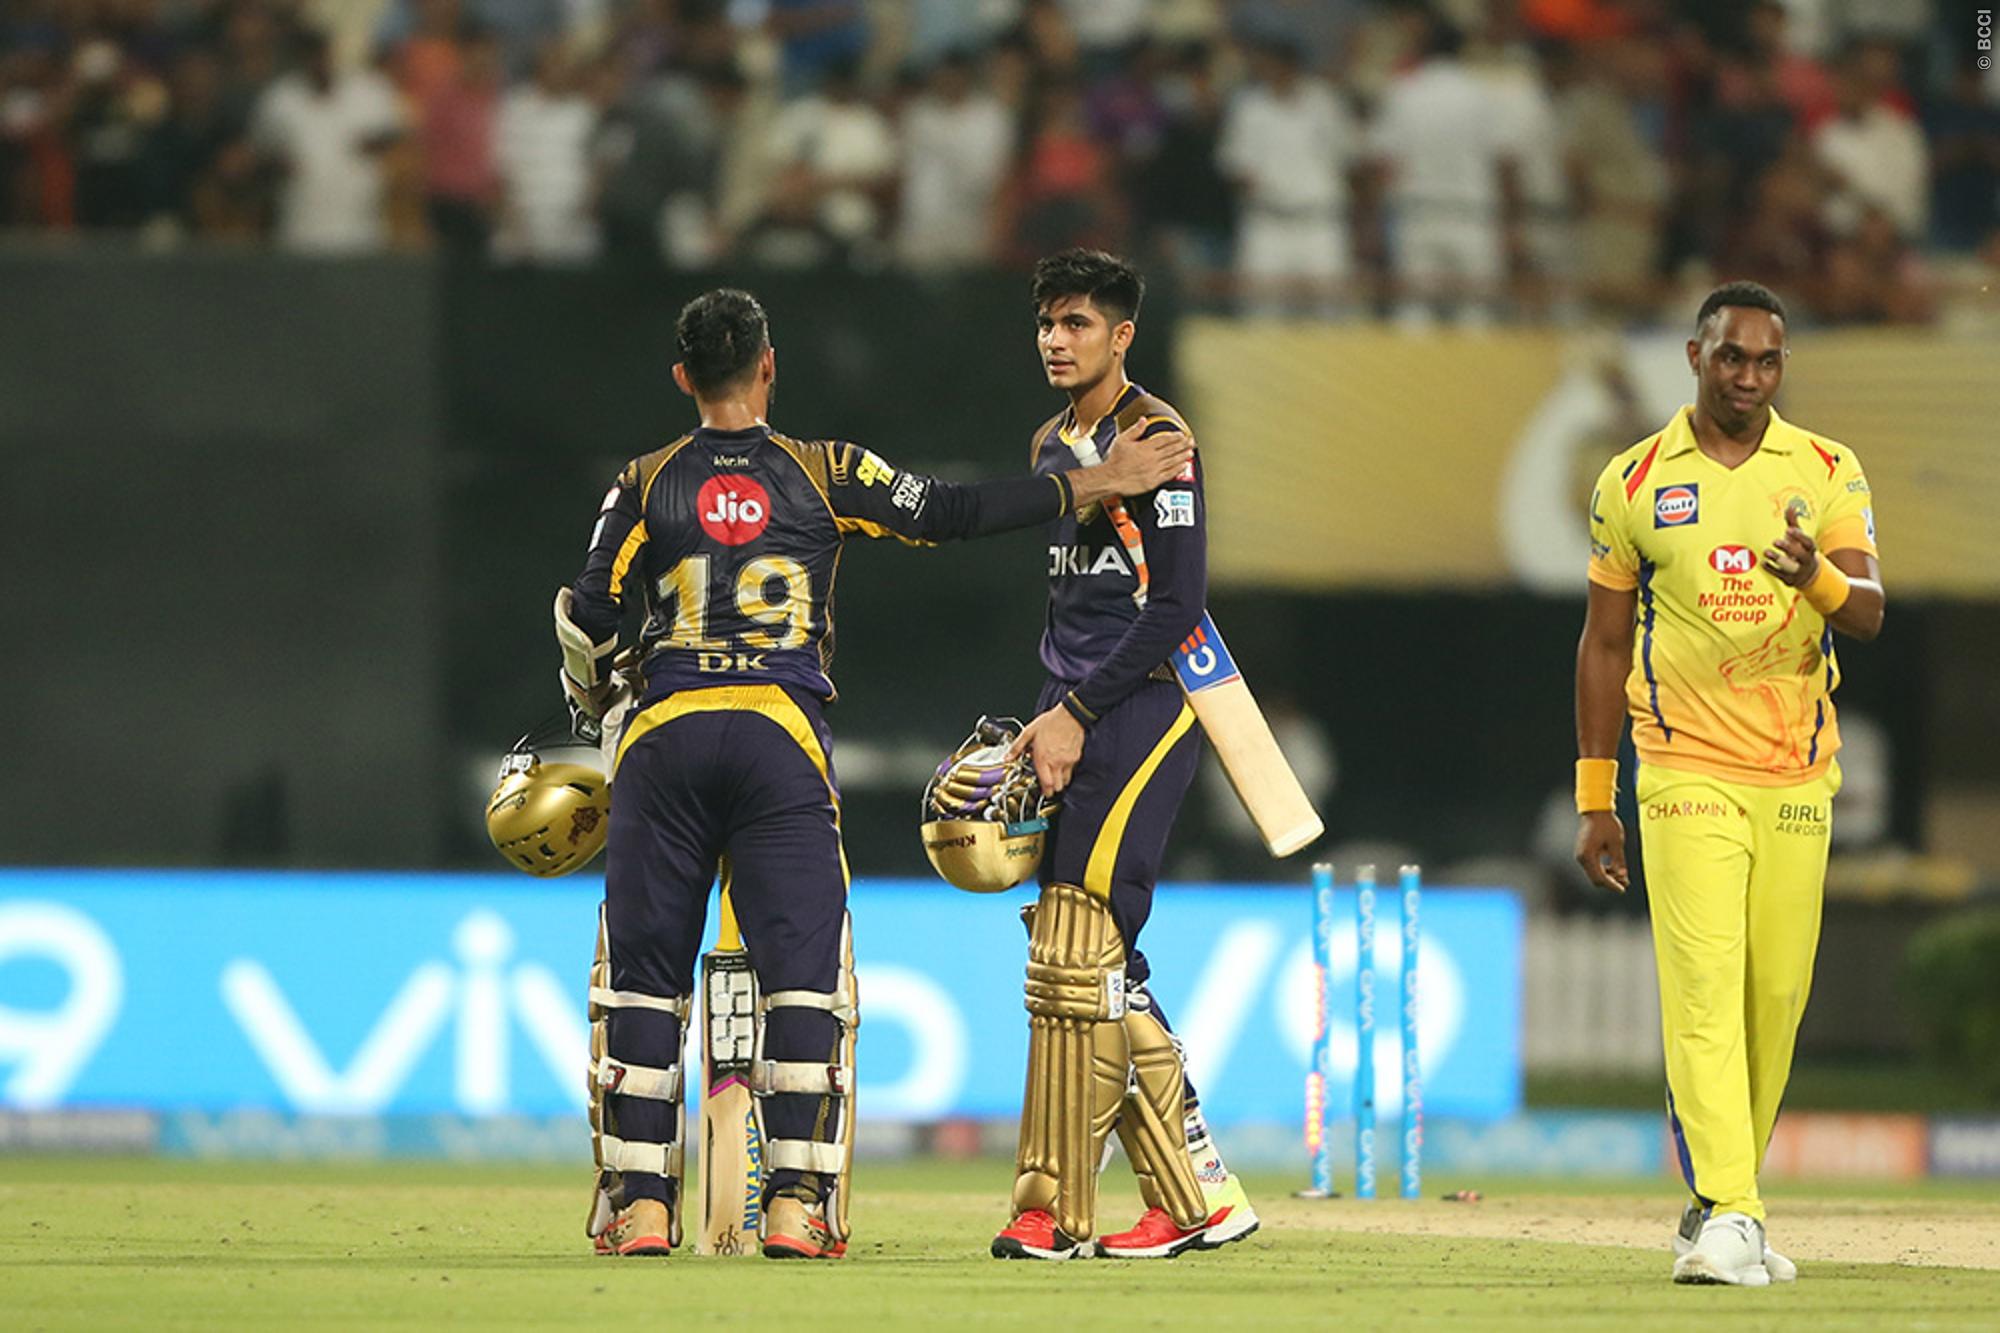 IPL 2020 | Learnt how to win games in any situation from MS Dhoni, admits Shubman Gill